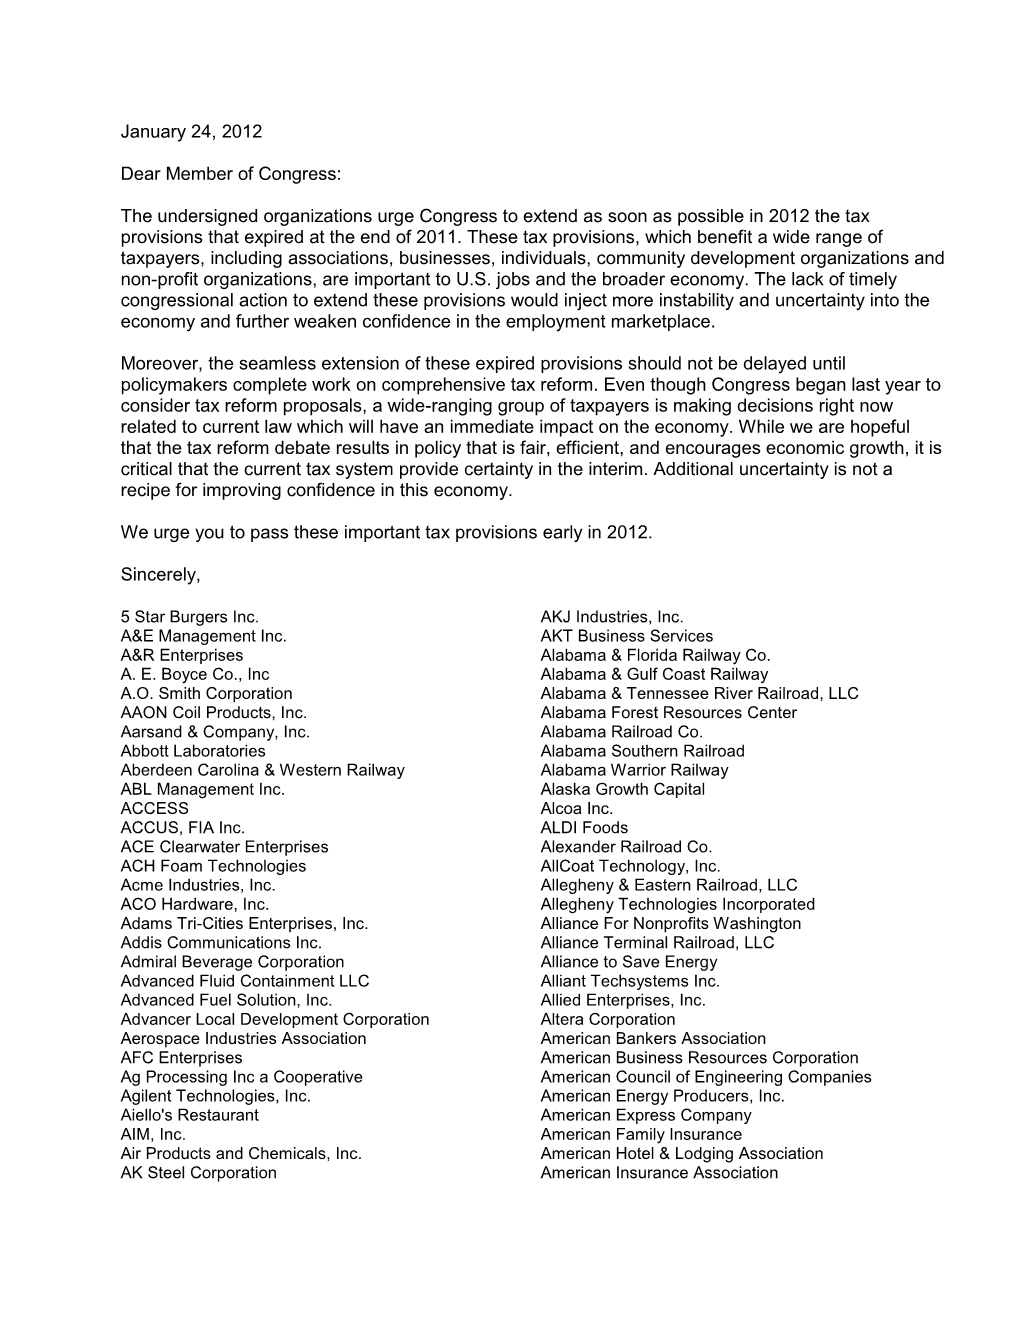 The Undersigned Organizations Urge Congress to Extend As Soon As Possible in 2012 the Tax Provisions That Expired at the End of 2011